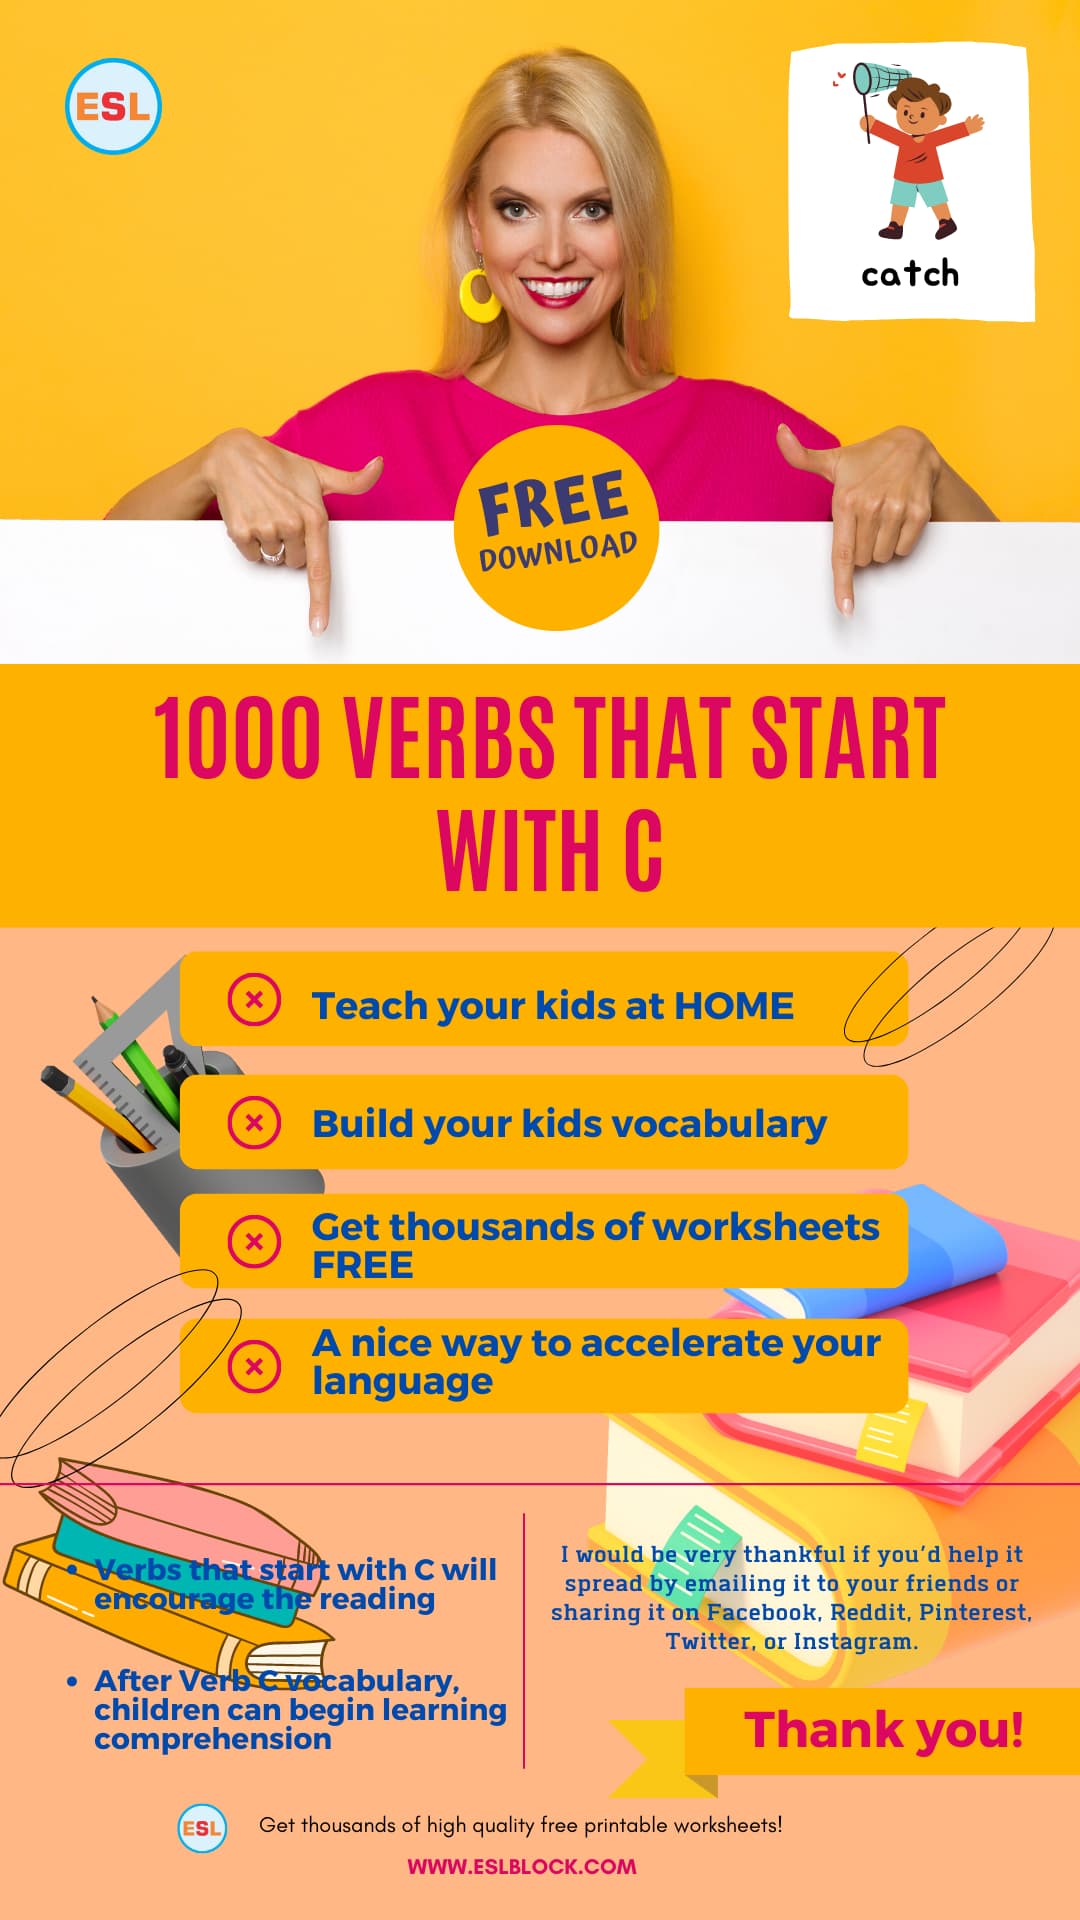 4 Letter Verbs, 5 Letter Verbs Starting With C, Action Words, Action Words That Start With C, C Action Words, C Verbs, C Verbs in English, English, English Grammar, English Vocabulary, English Words, List of Verbs That Start With C, Verbs List, Verbs That Start With C, Vocabulary, Words That Start With C